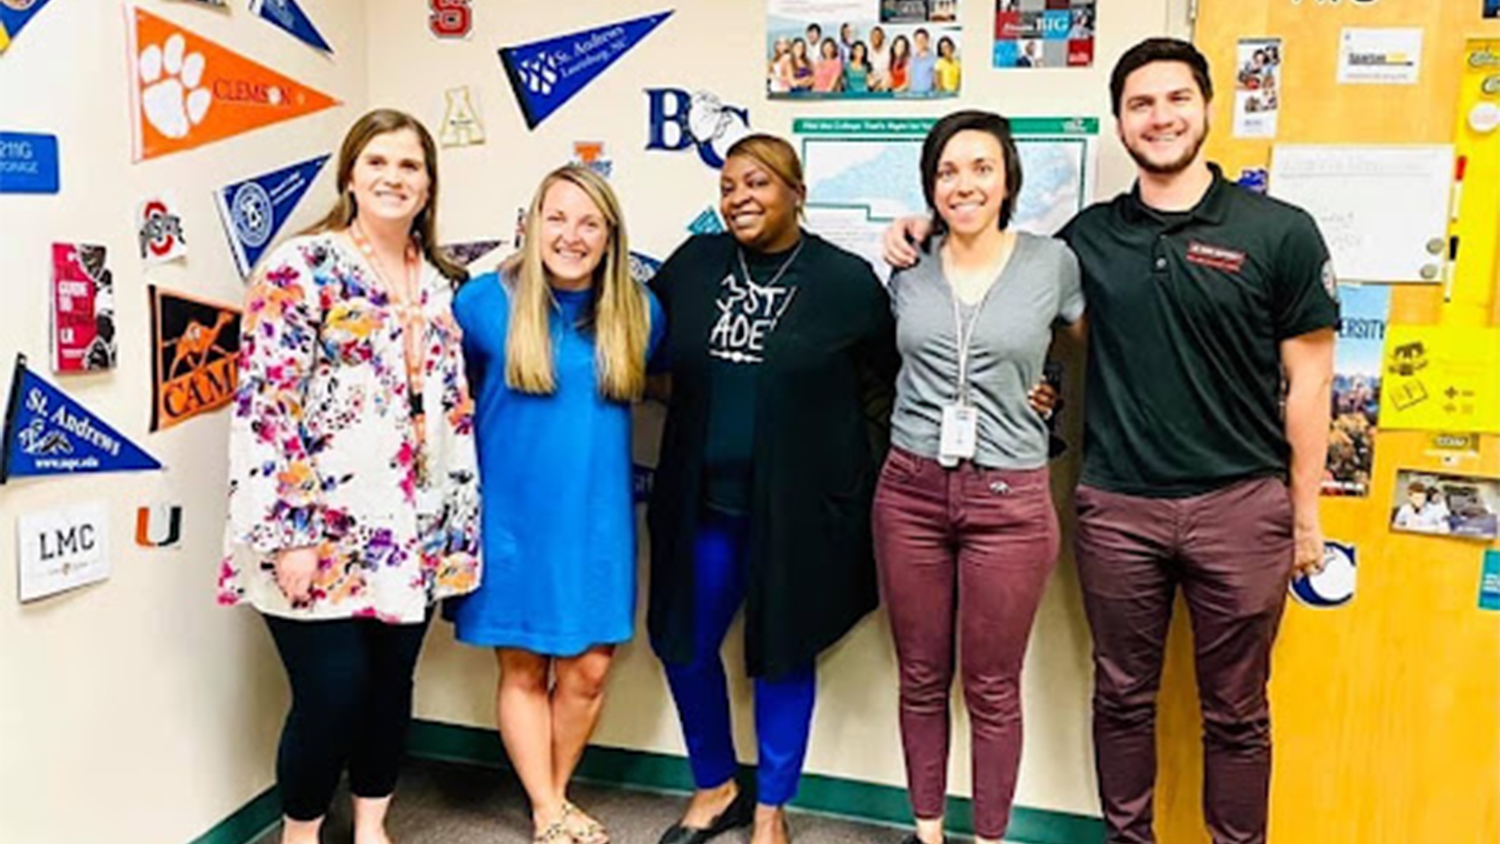 Five members of the Heide Trask High School staff in front of a wall covered in pennants from different colleges and universities